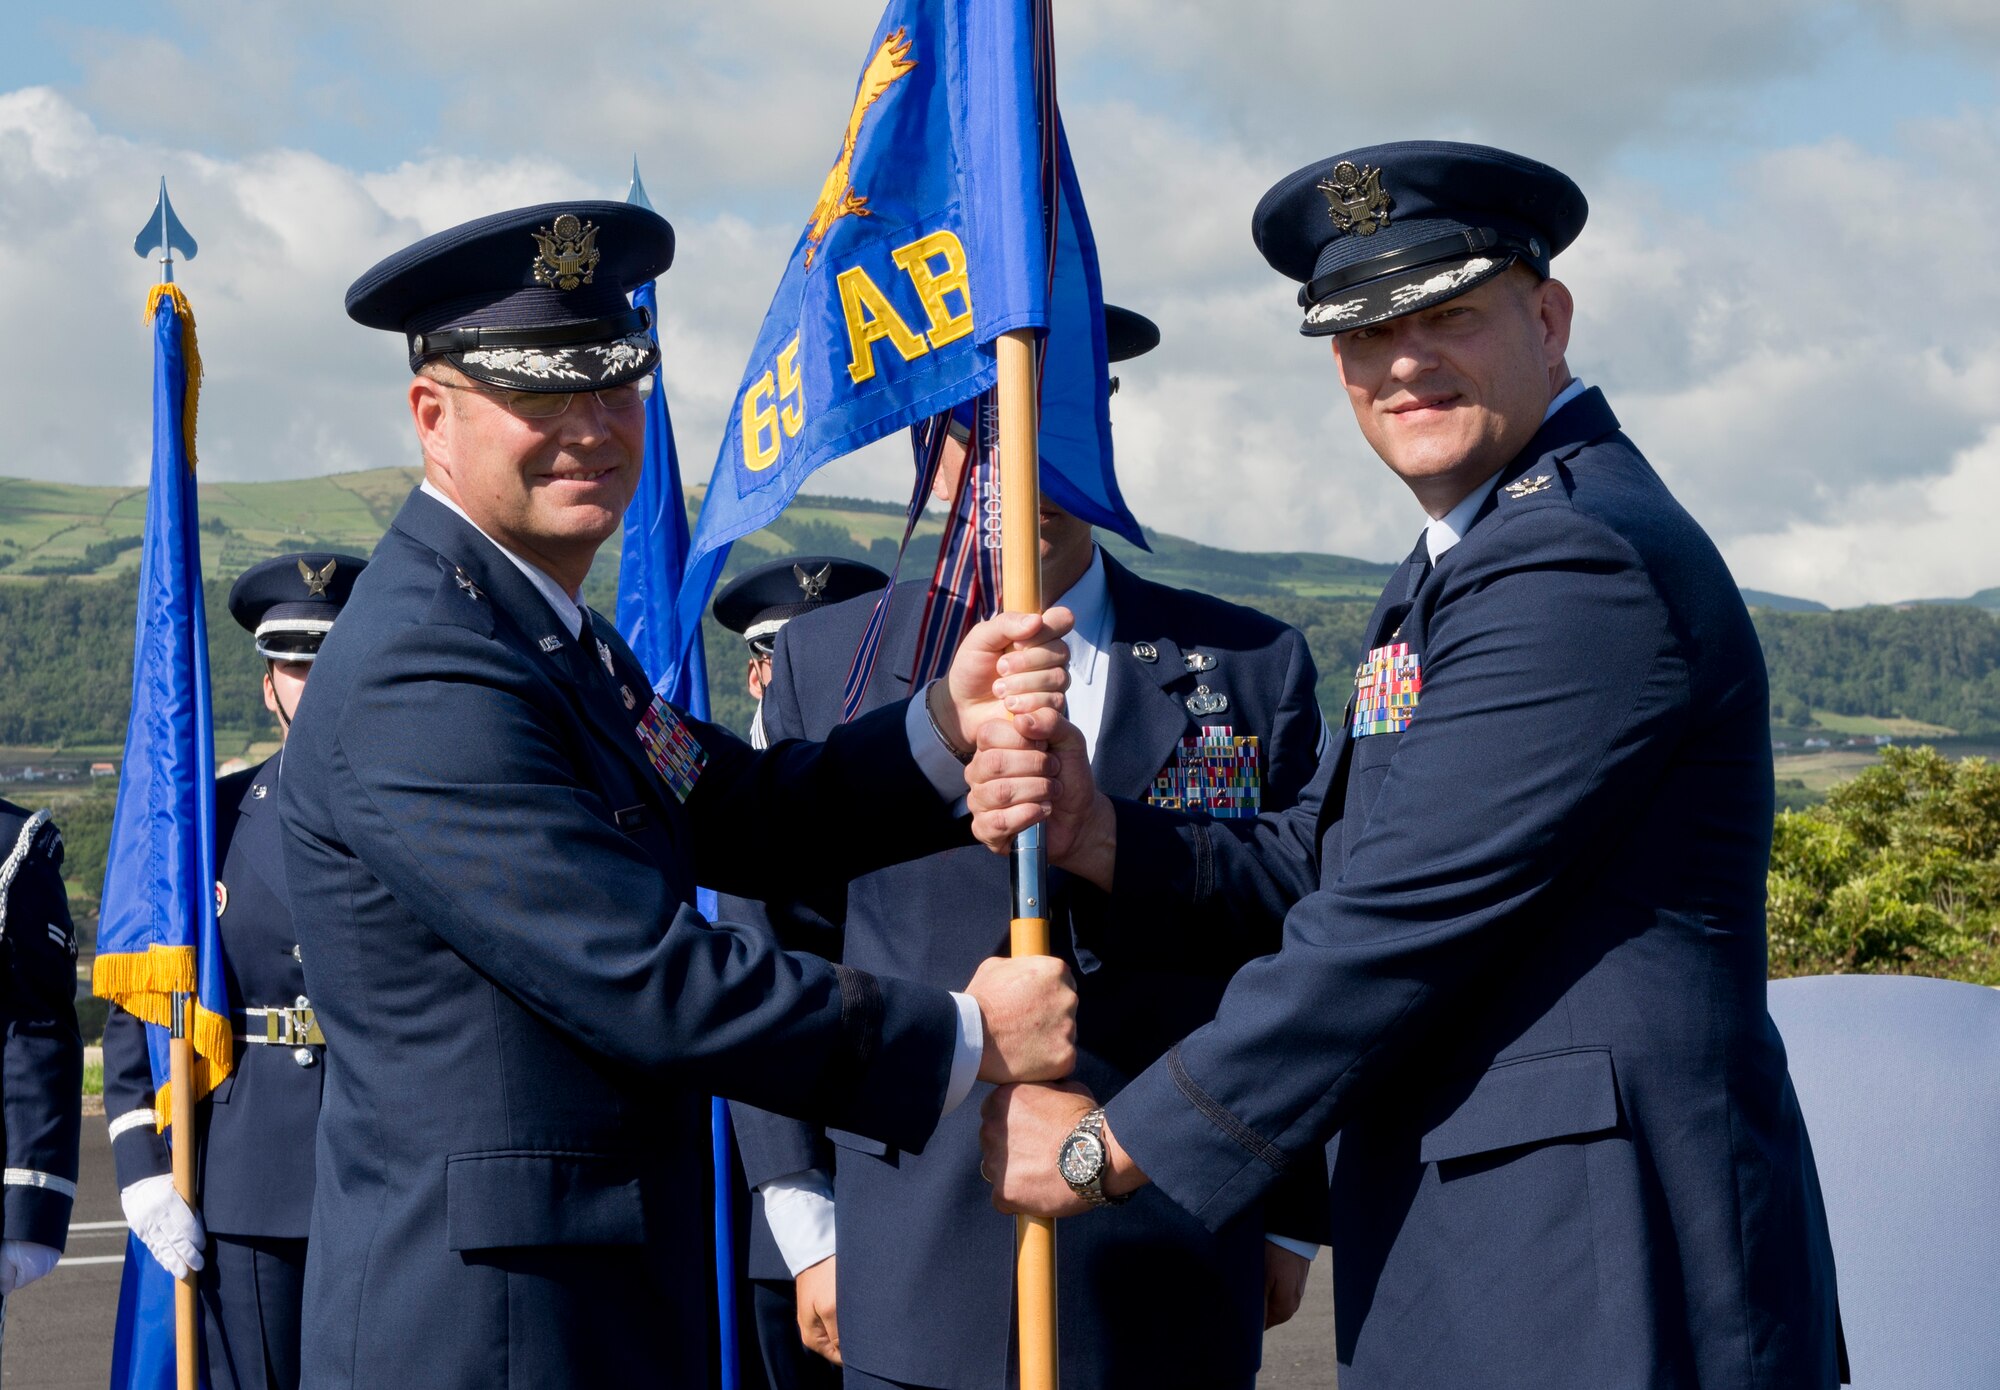 Col. Richard Sheffe, commander of the 65th Air Base Group, receives the guidon from Brig. Gen. Jon Thomas, commander of the 86th Airlift Wing, Ramstein Air Base, Germany. Sheffe assumes command of the 65th Air Base Group during a Redesignation Ceremony on Lajes Field, Azores, Portugal, August 14, 2015. With this Redesignation Ceremony, the 65th Air Base Group is now aligned under the 86th Airlift Wing and remains positioned to provide agile combat support and services to aircraft and aircrews. (U.S. Air Force photo by Master Sgt. Bradley C. Church)